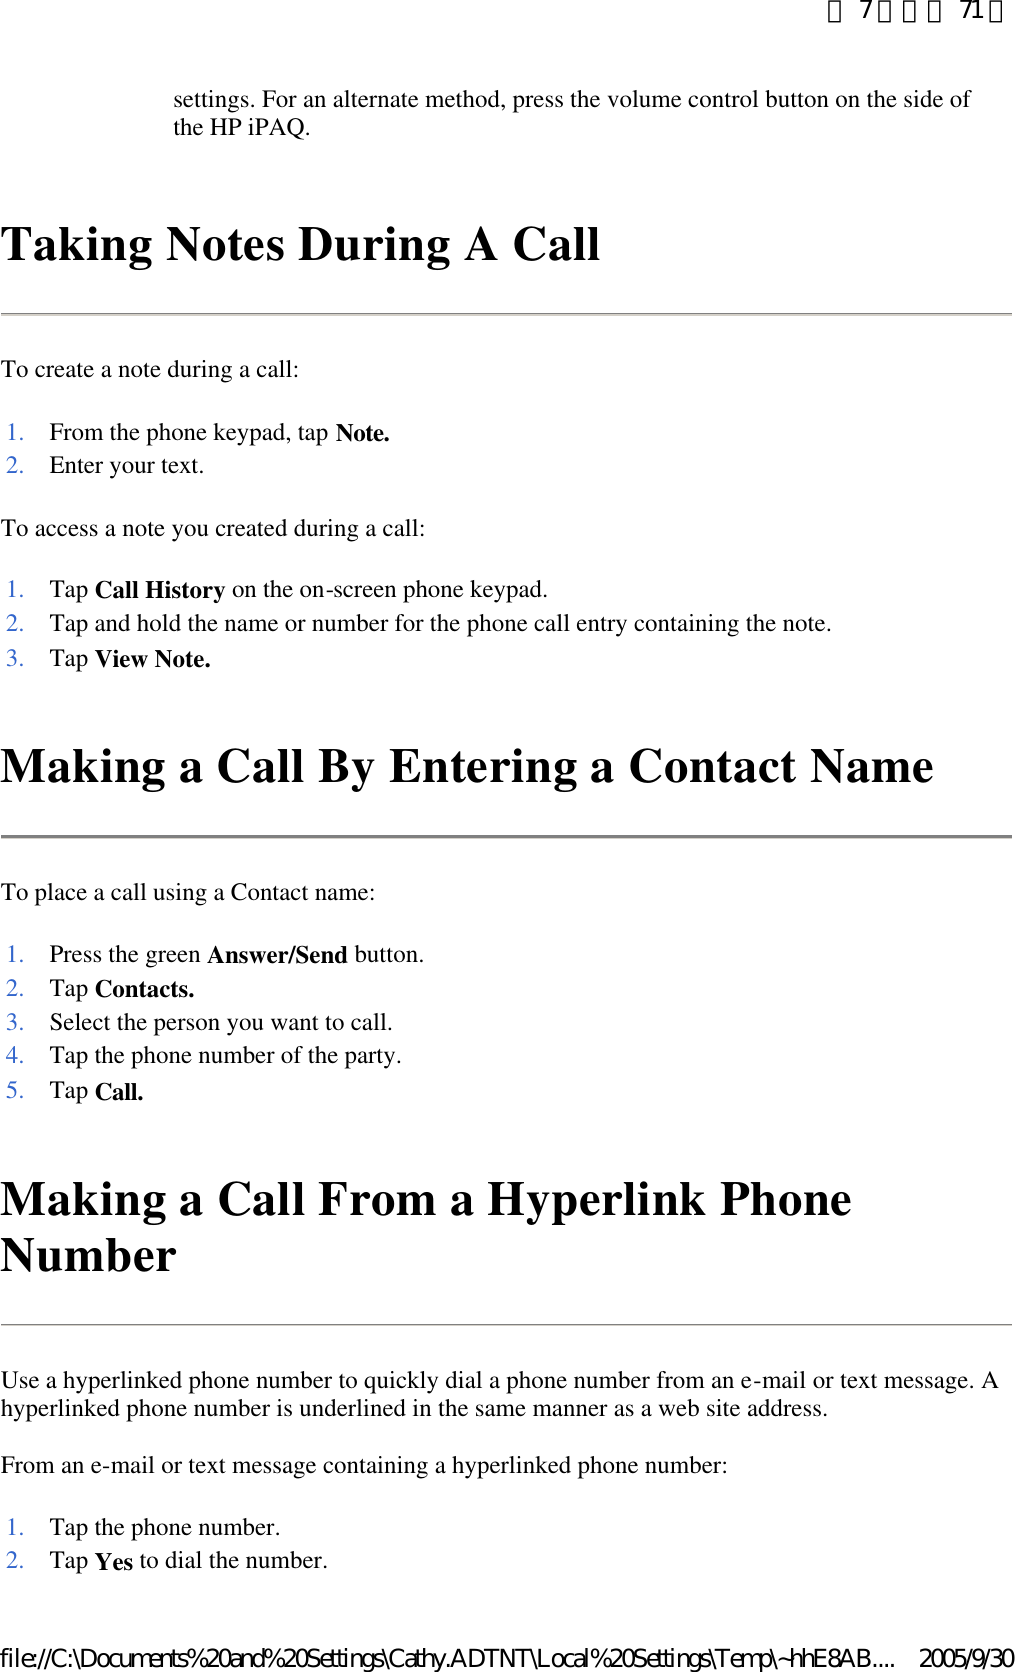 Taking Notes During A Call  To create a note during a call: To access a note you created during a call: Making a Call By Entering a Contact Name  To place a call using a Contact name:  Making a Call From a Hyperlink Phone Number  Use a hyperlinked phone number to quickly dial a phone number from an e-mail or text message. A hyperlinked phone number is underlined in the same manner as a web site address.  From an e-mail or text message containing a hyperlinked phone number:  settings. For an alternate method, press the volume control button on the side of the HP iPAQ.  1. From the phone keypad, tap Note.2. Enter your text. 1. Tap Call History on the on-screen phone keypad. 2. Tap and hold the name or number for the phone call entry containing the note.3. Tap View Note.1. Press the green Answer/Send button. 2. Tap Contacts.3. Select the person you want to call. 4. Tap the phone number of the party.5. Tap Call.1. Tap the phone number.2. Tap Yes to dial the number. 第 7 頁，共 71 頁2005/9/30file://C:\Documents%20and%20Settings\Cathy.ADTNT\Local%20Settings\Temp\~hhE8AB....